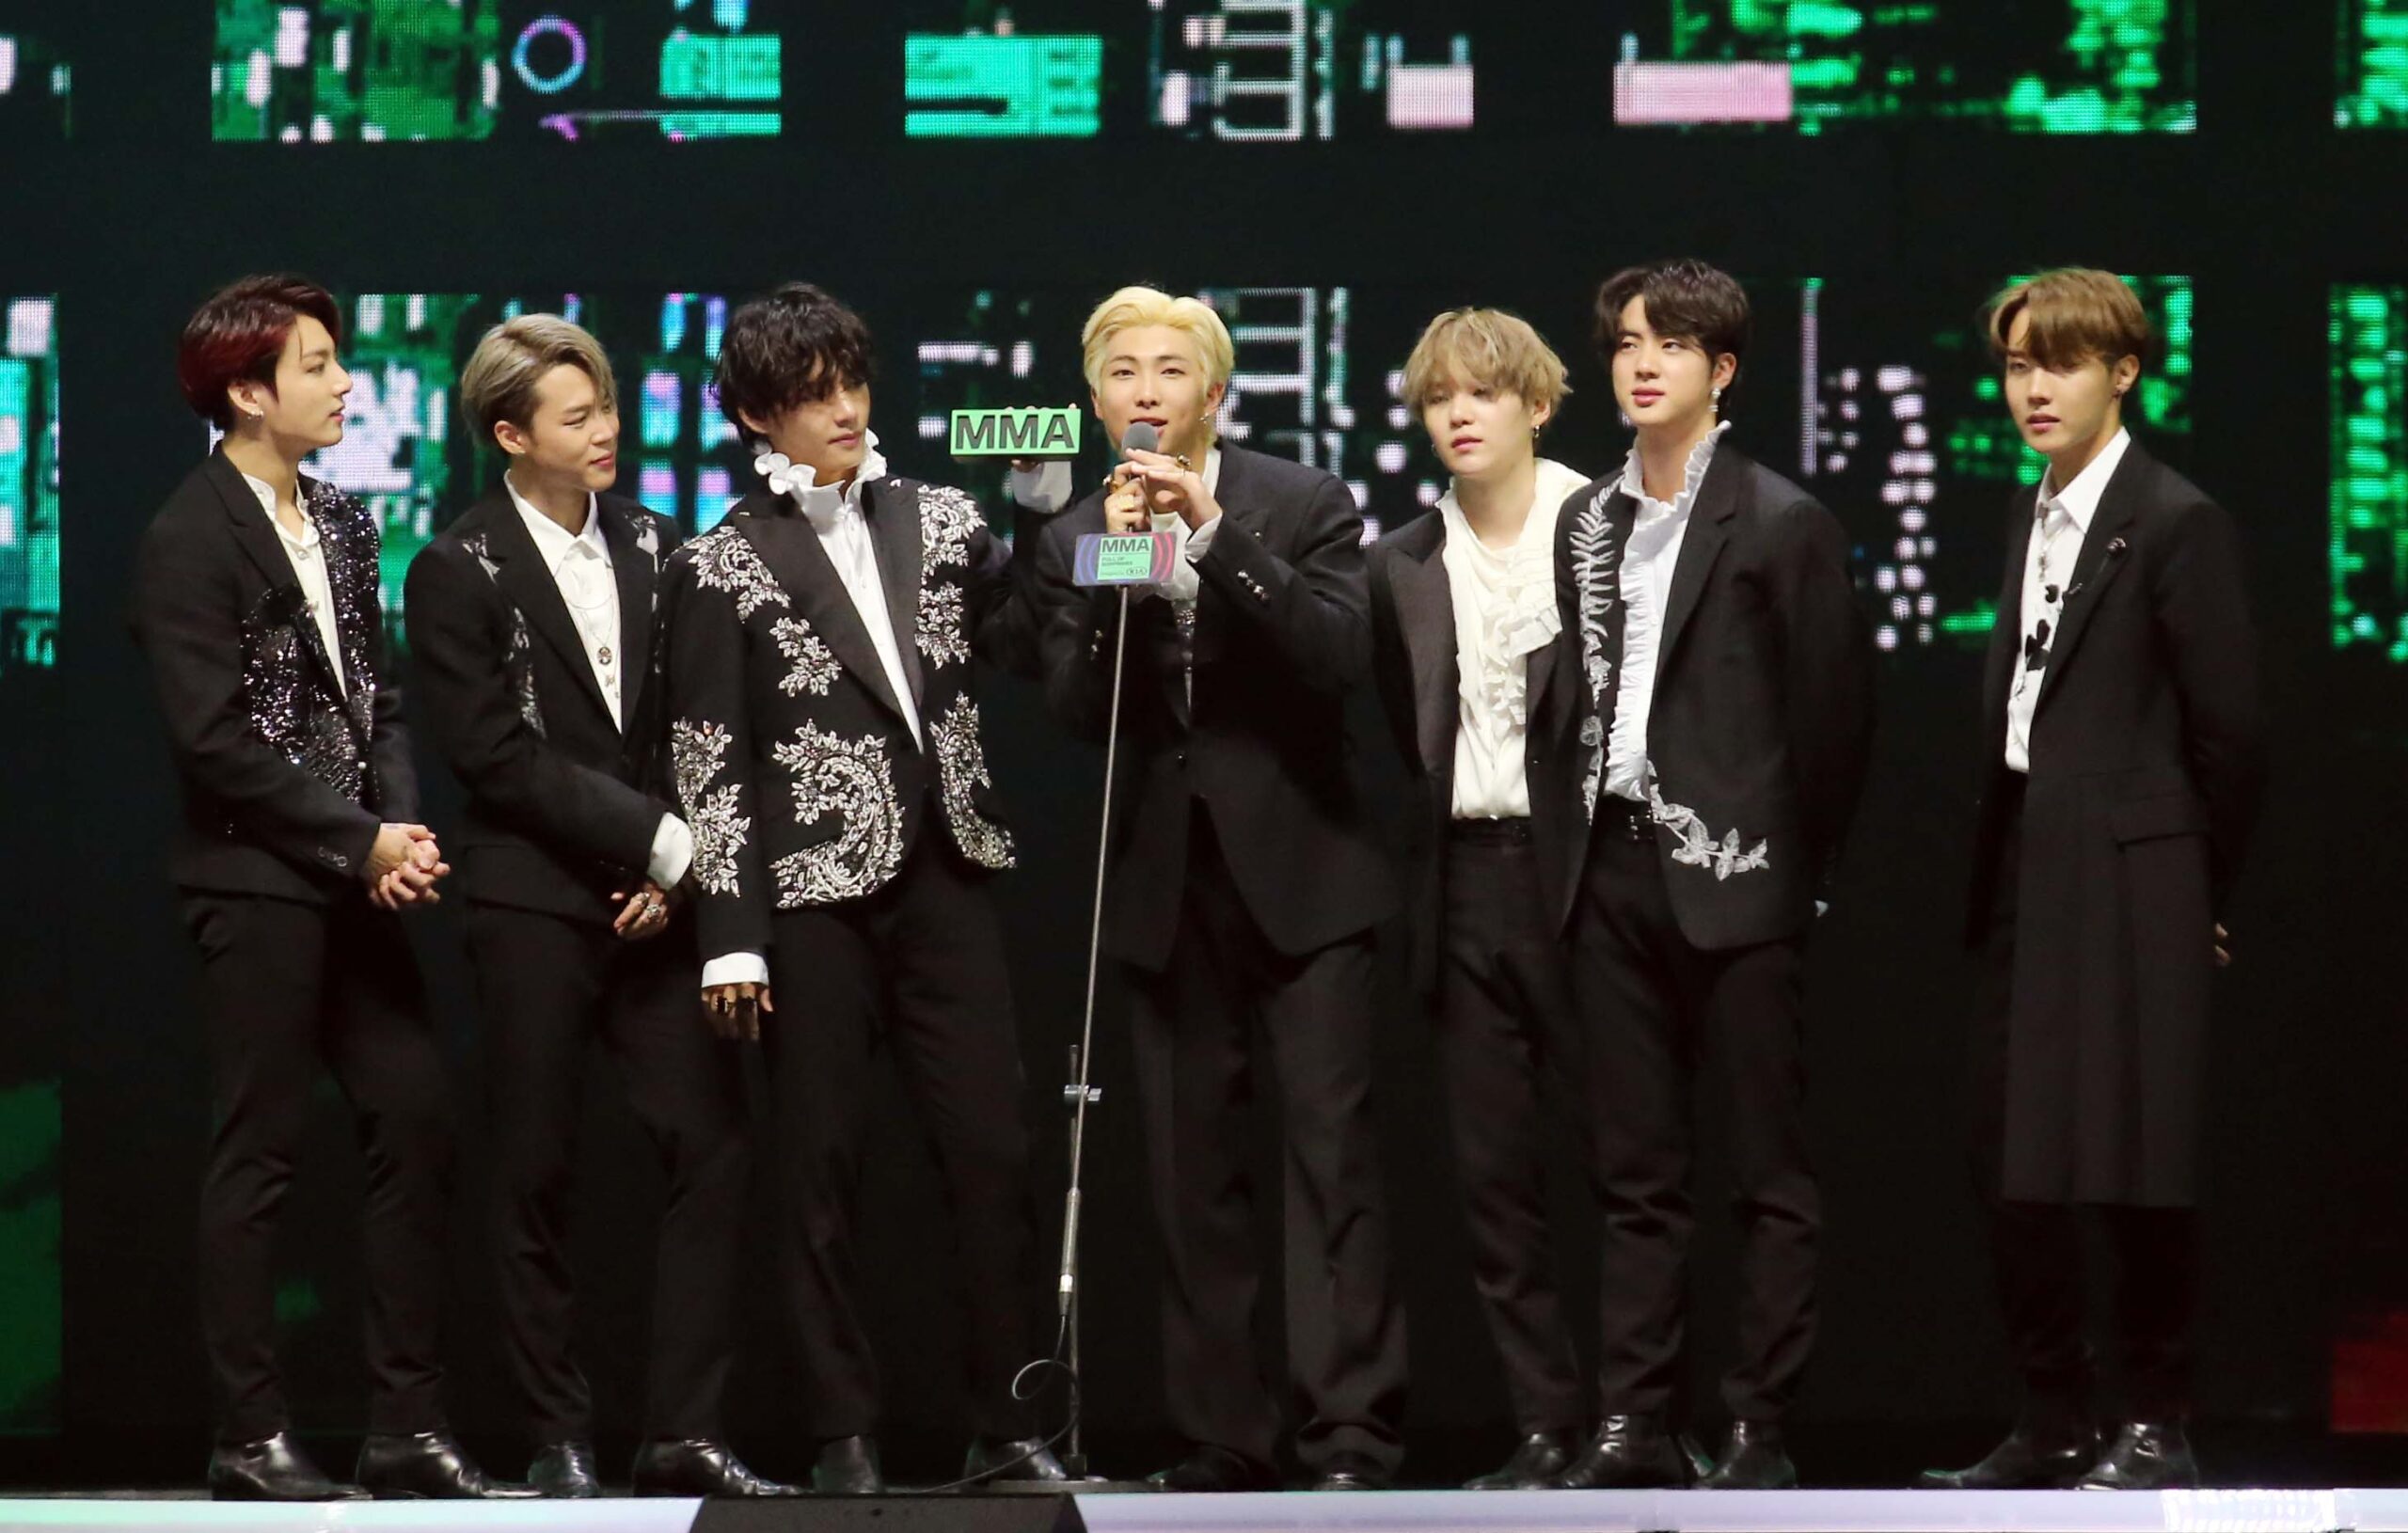 bts-confirmed-as-first-artist-to-attend-2020-melon-music-awards-held-in-december-2